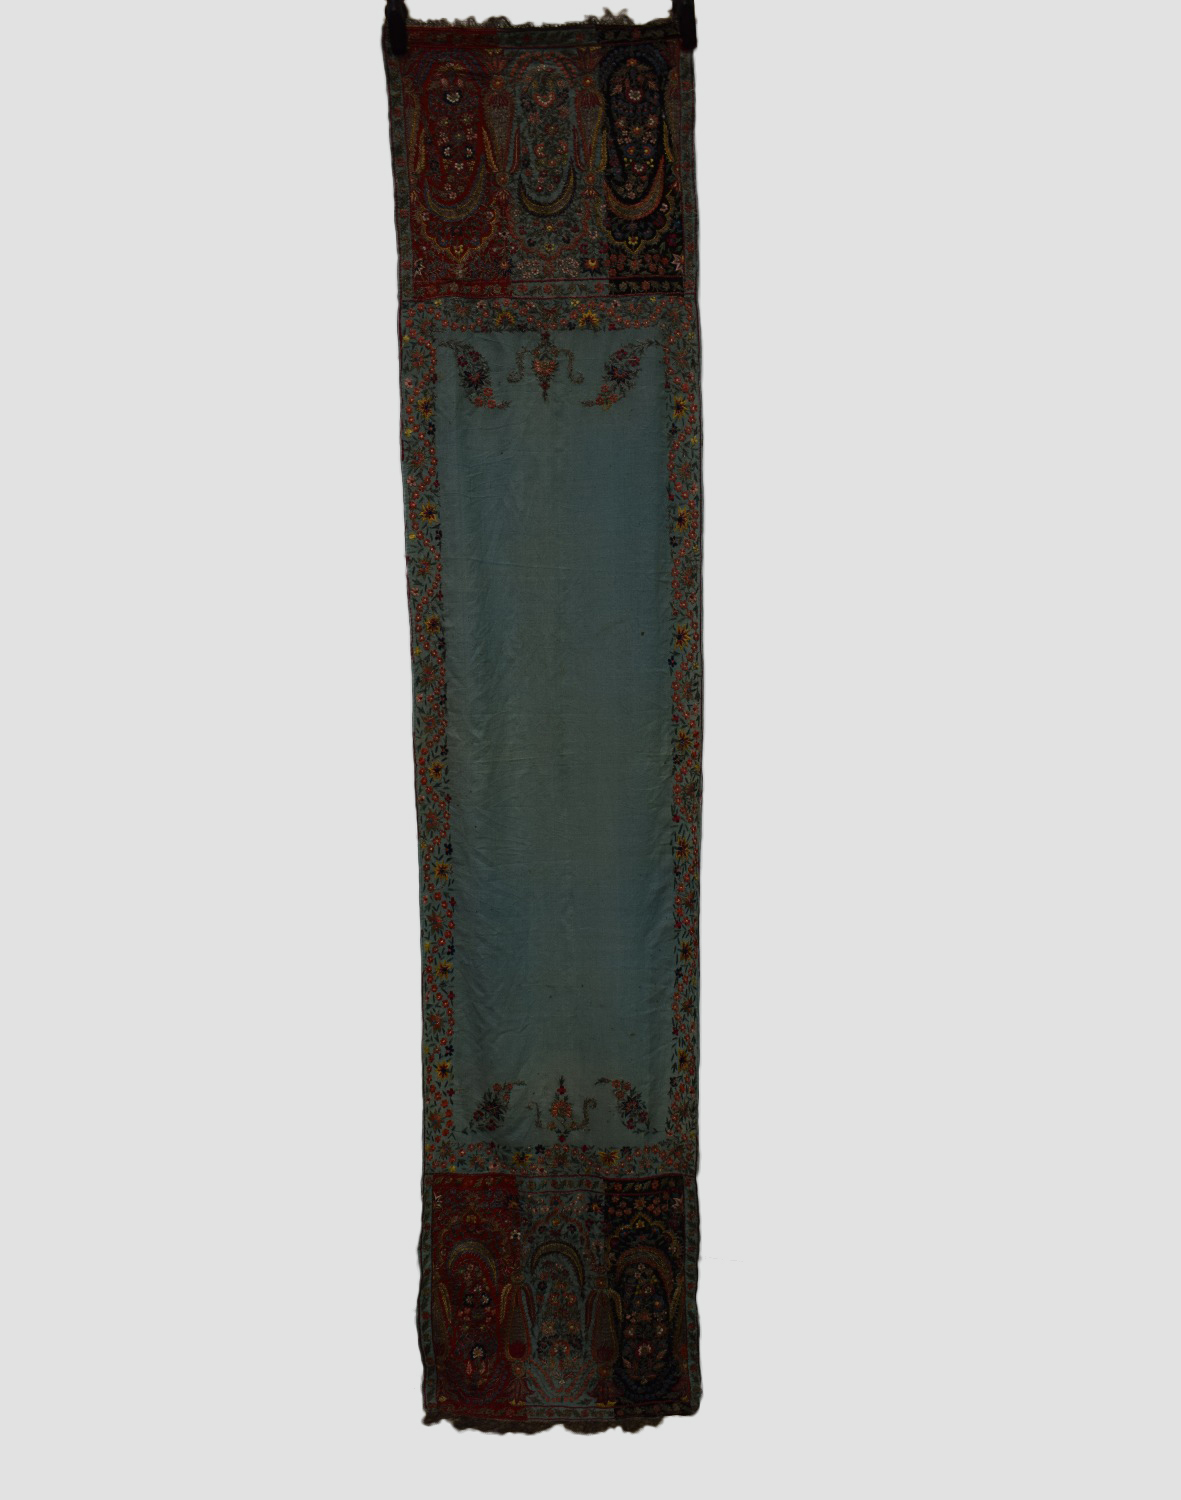 Kashmir stole, north India, early 20th century, 99in. X 22in. 251cm. X 56cm. The pale green fine